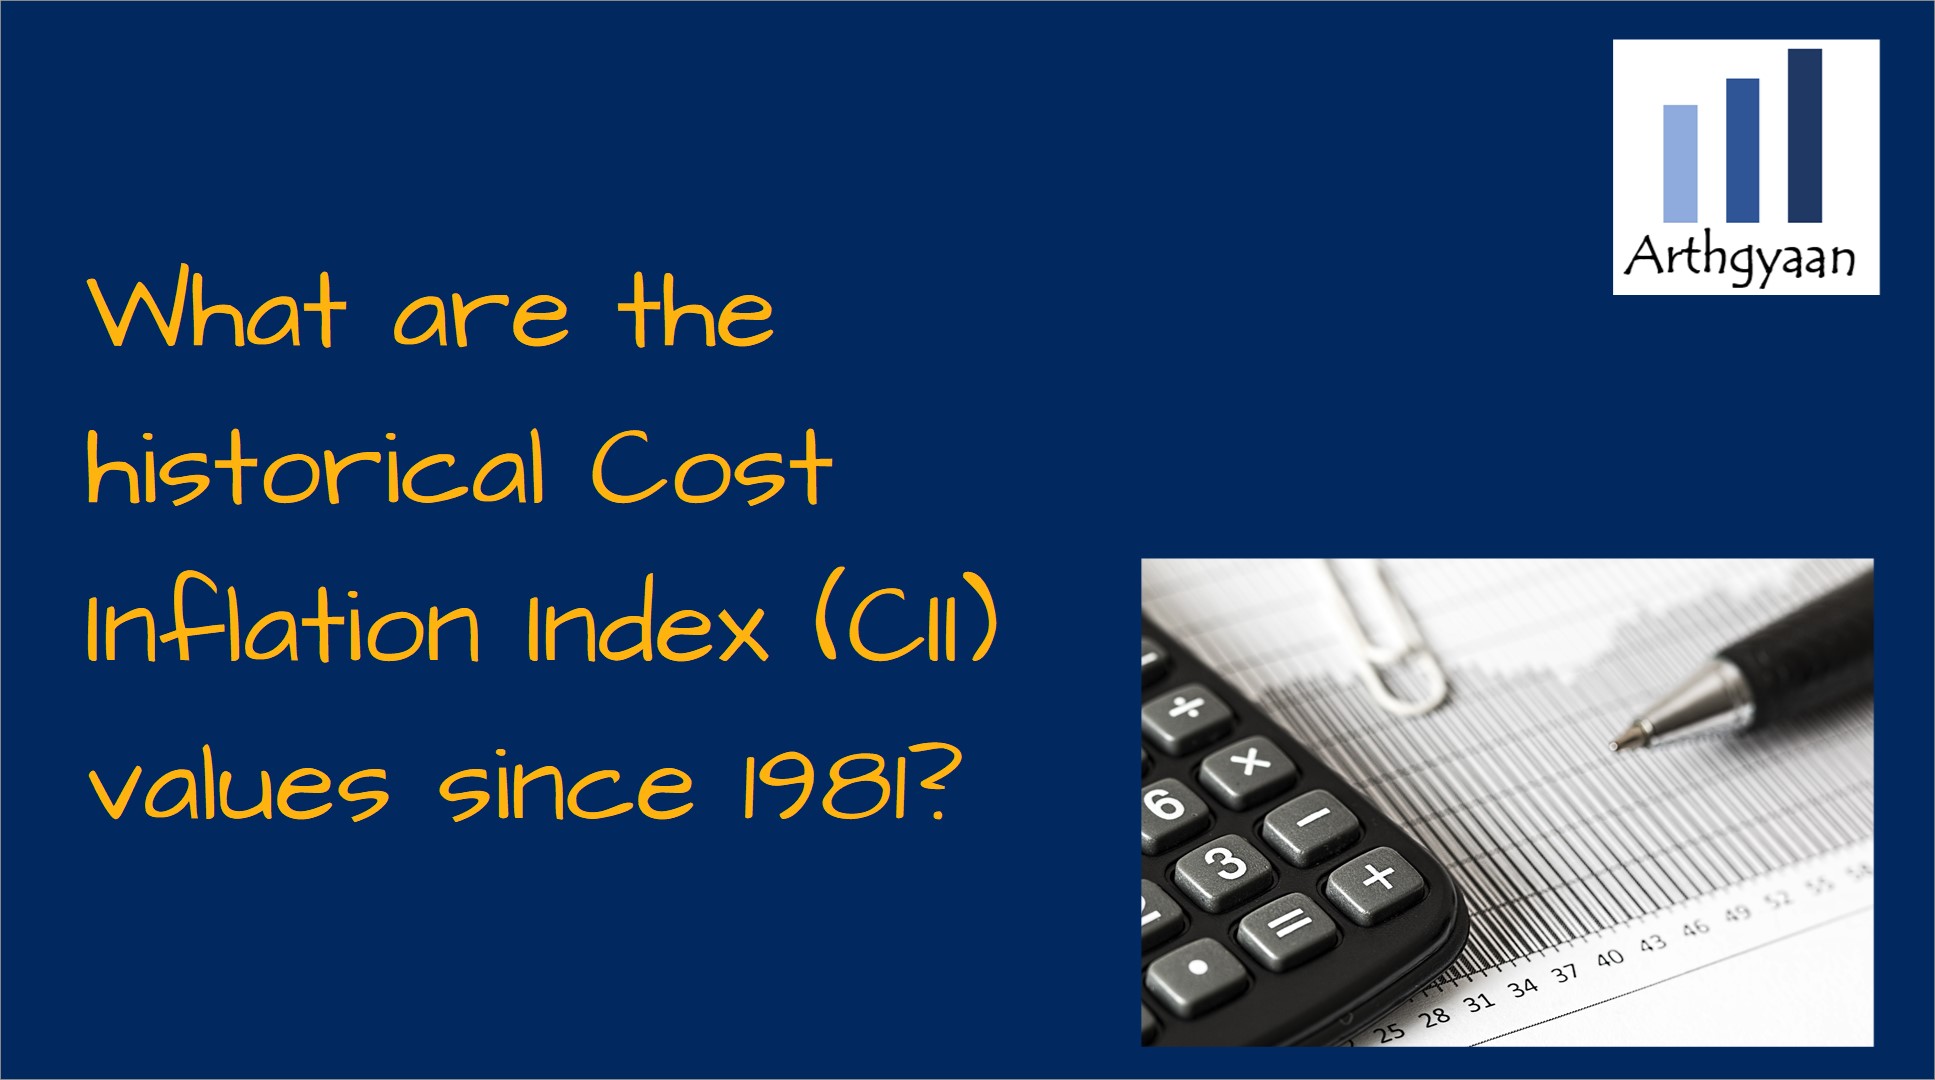 What are the historical Cost Inflation Index (CII) values since 1981?